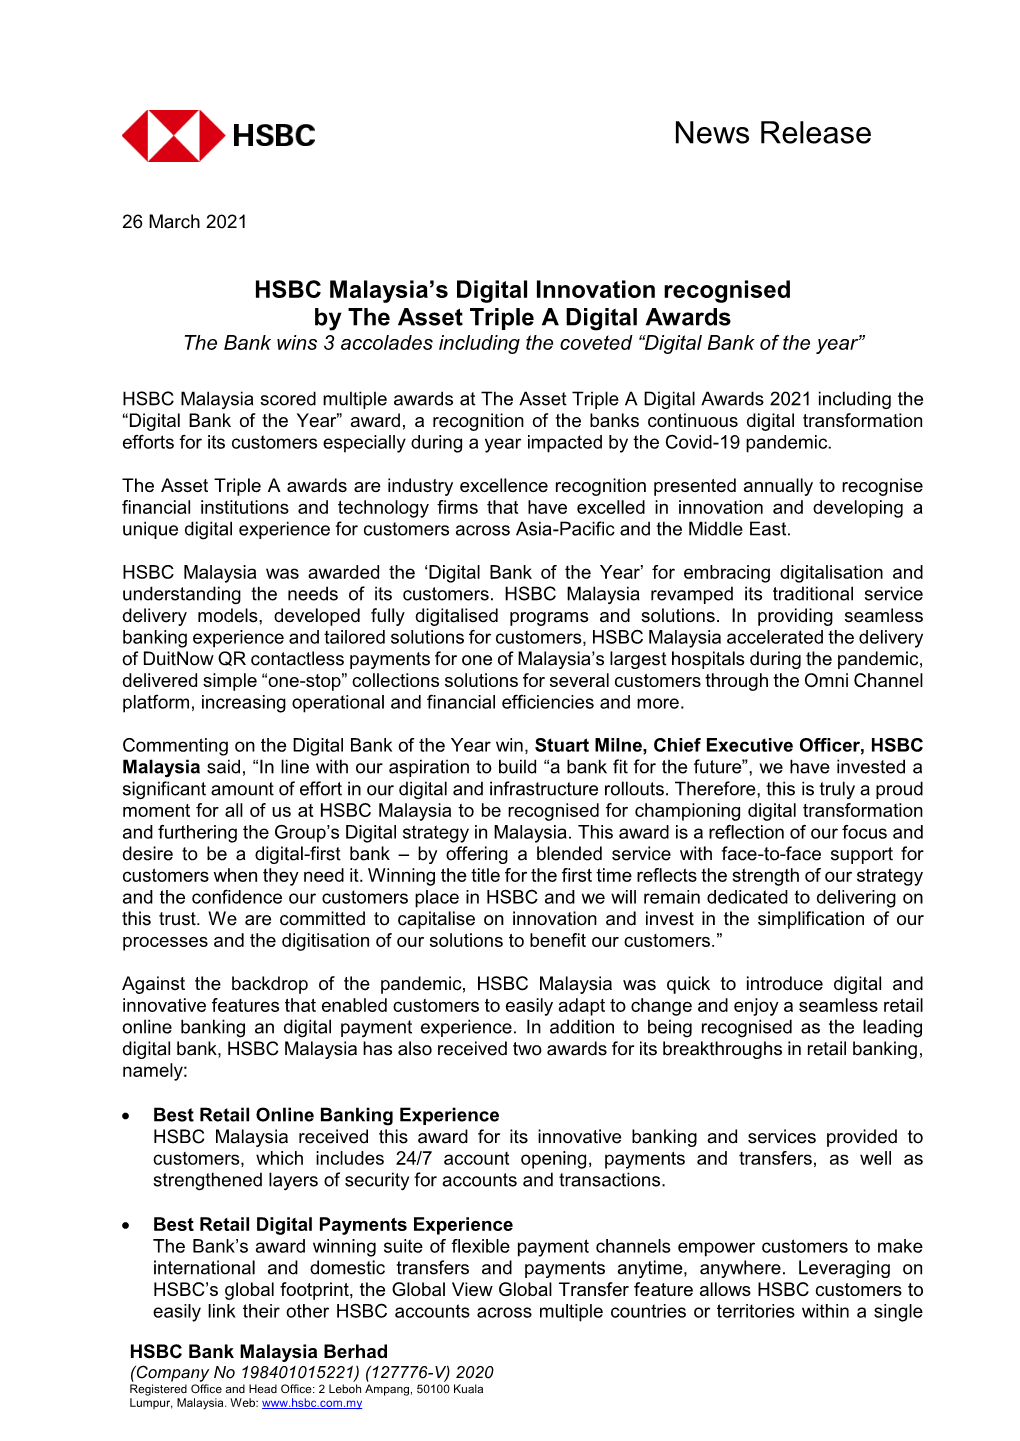 HSBC Malaysia's Digital Innovation Recognised by the Asset Triple A